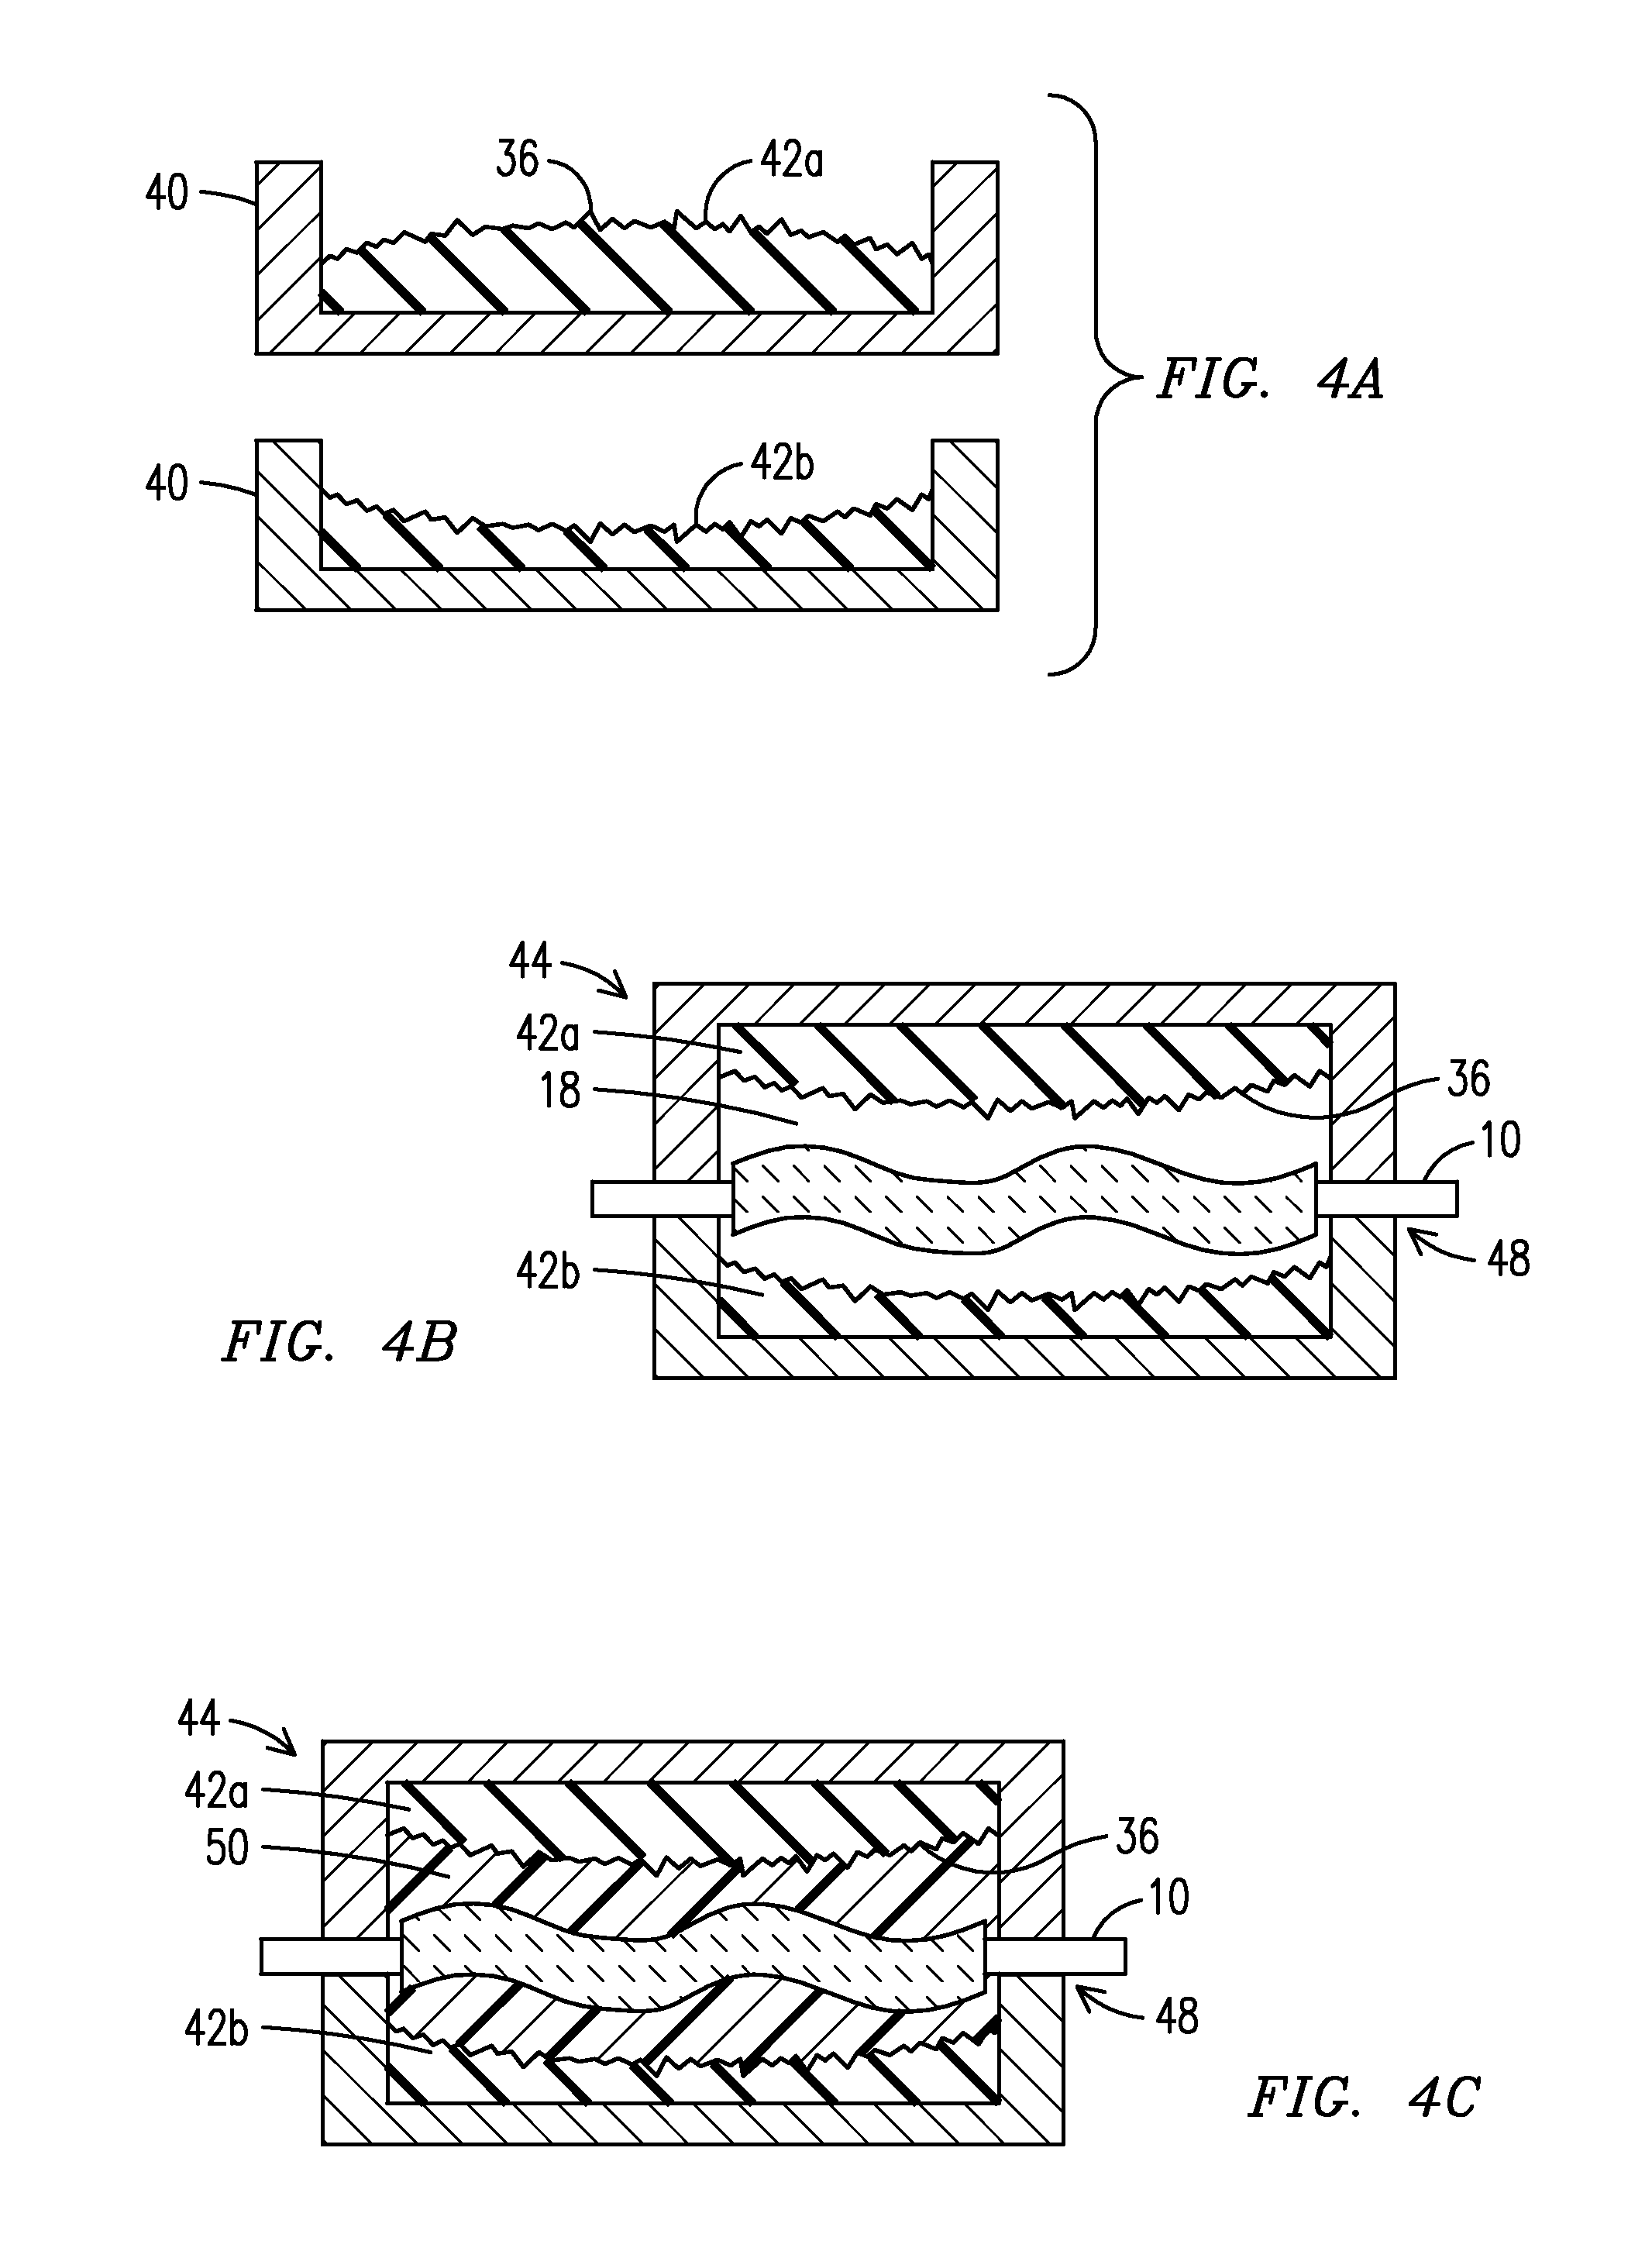 Investment casting utilizing flexible wax pattern tool for supporting a ceramic core along its length during wax injection